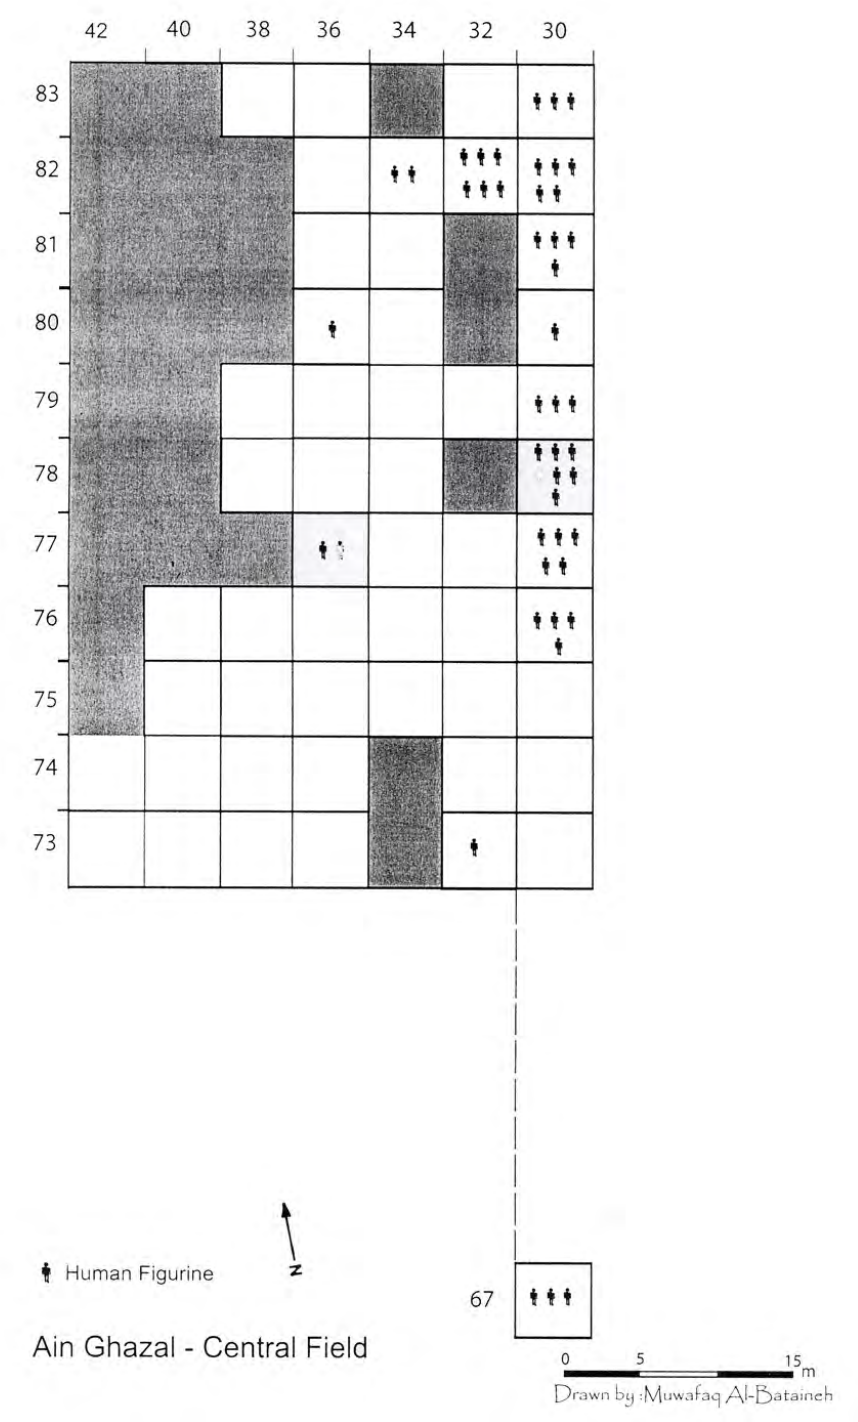 Numbered grid illustrating the number of human figurines in each excavated square.